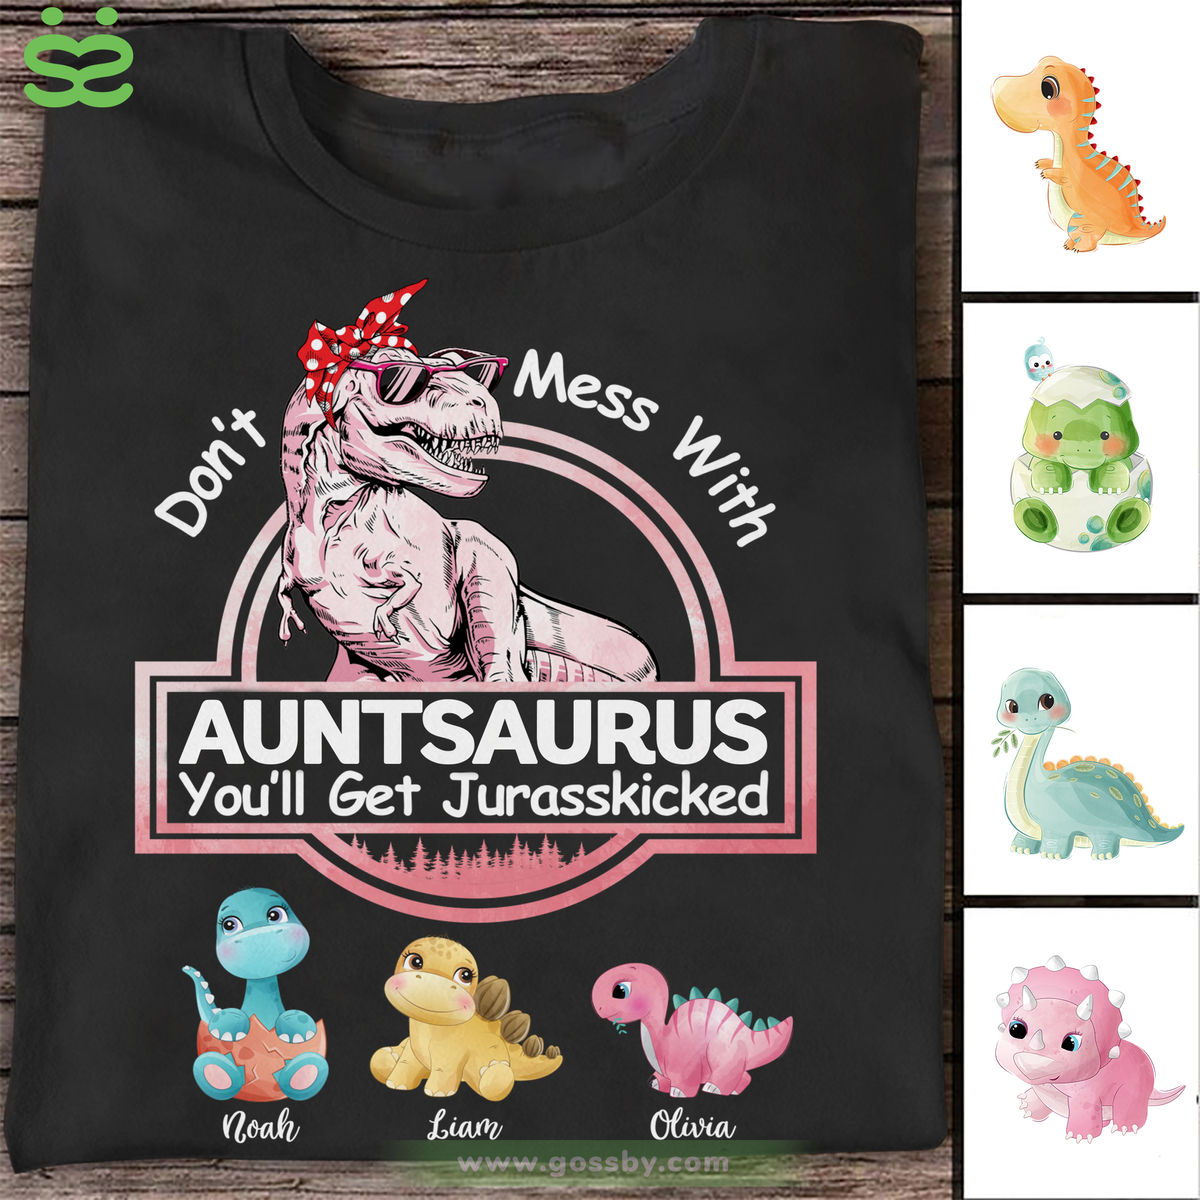 Personalized Shirt - Family - Don't Mess With Auntsaurus - Mother's Day Gifts, Gifts For Mother, Grandma, Nana, Aunt